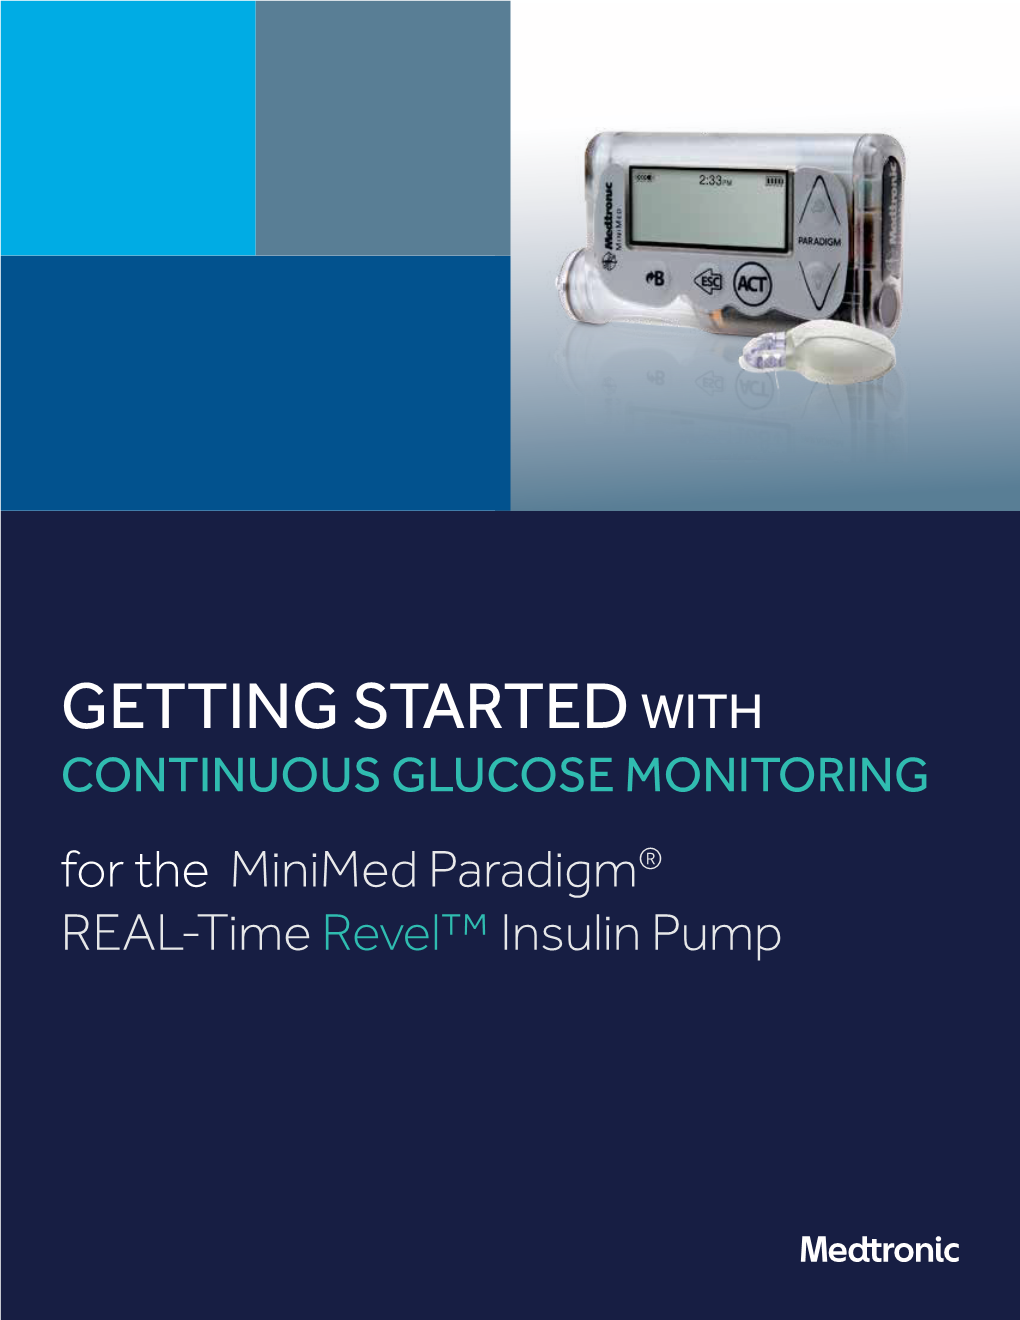 Getting Started with Continuous Glucose Monitoring for Paradigm